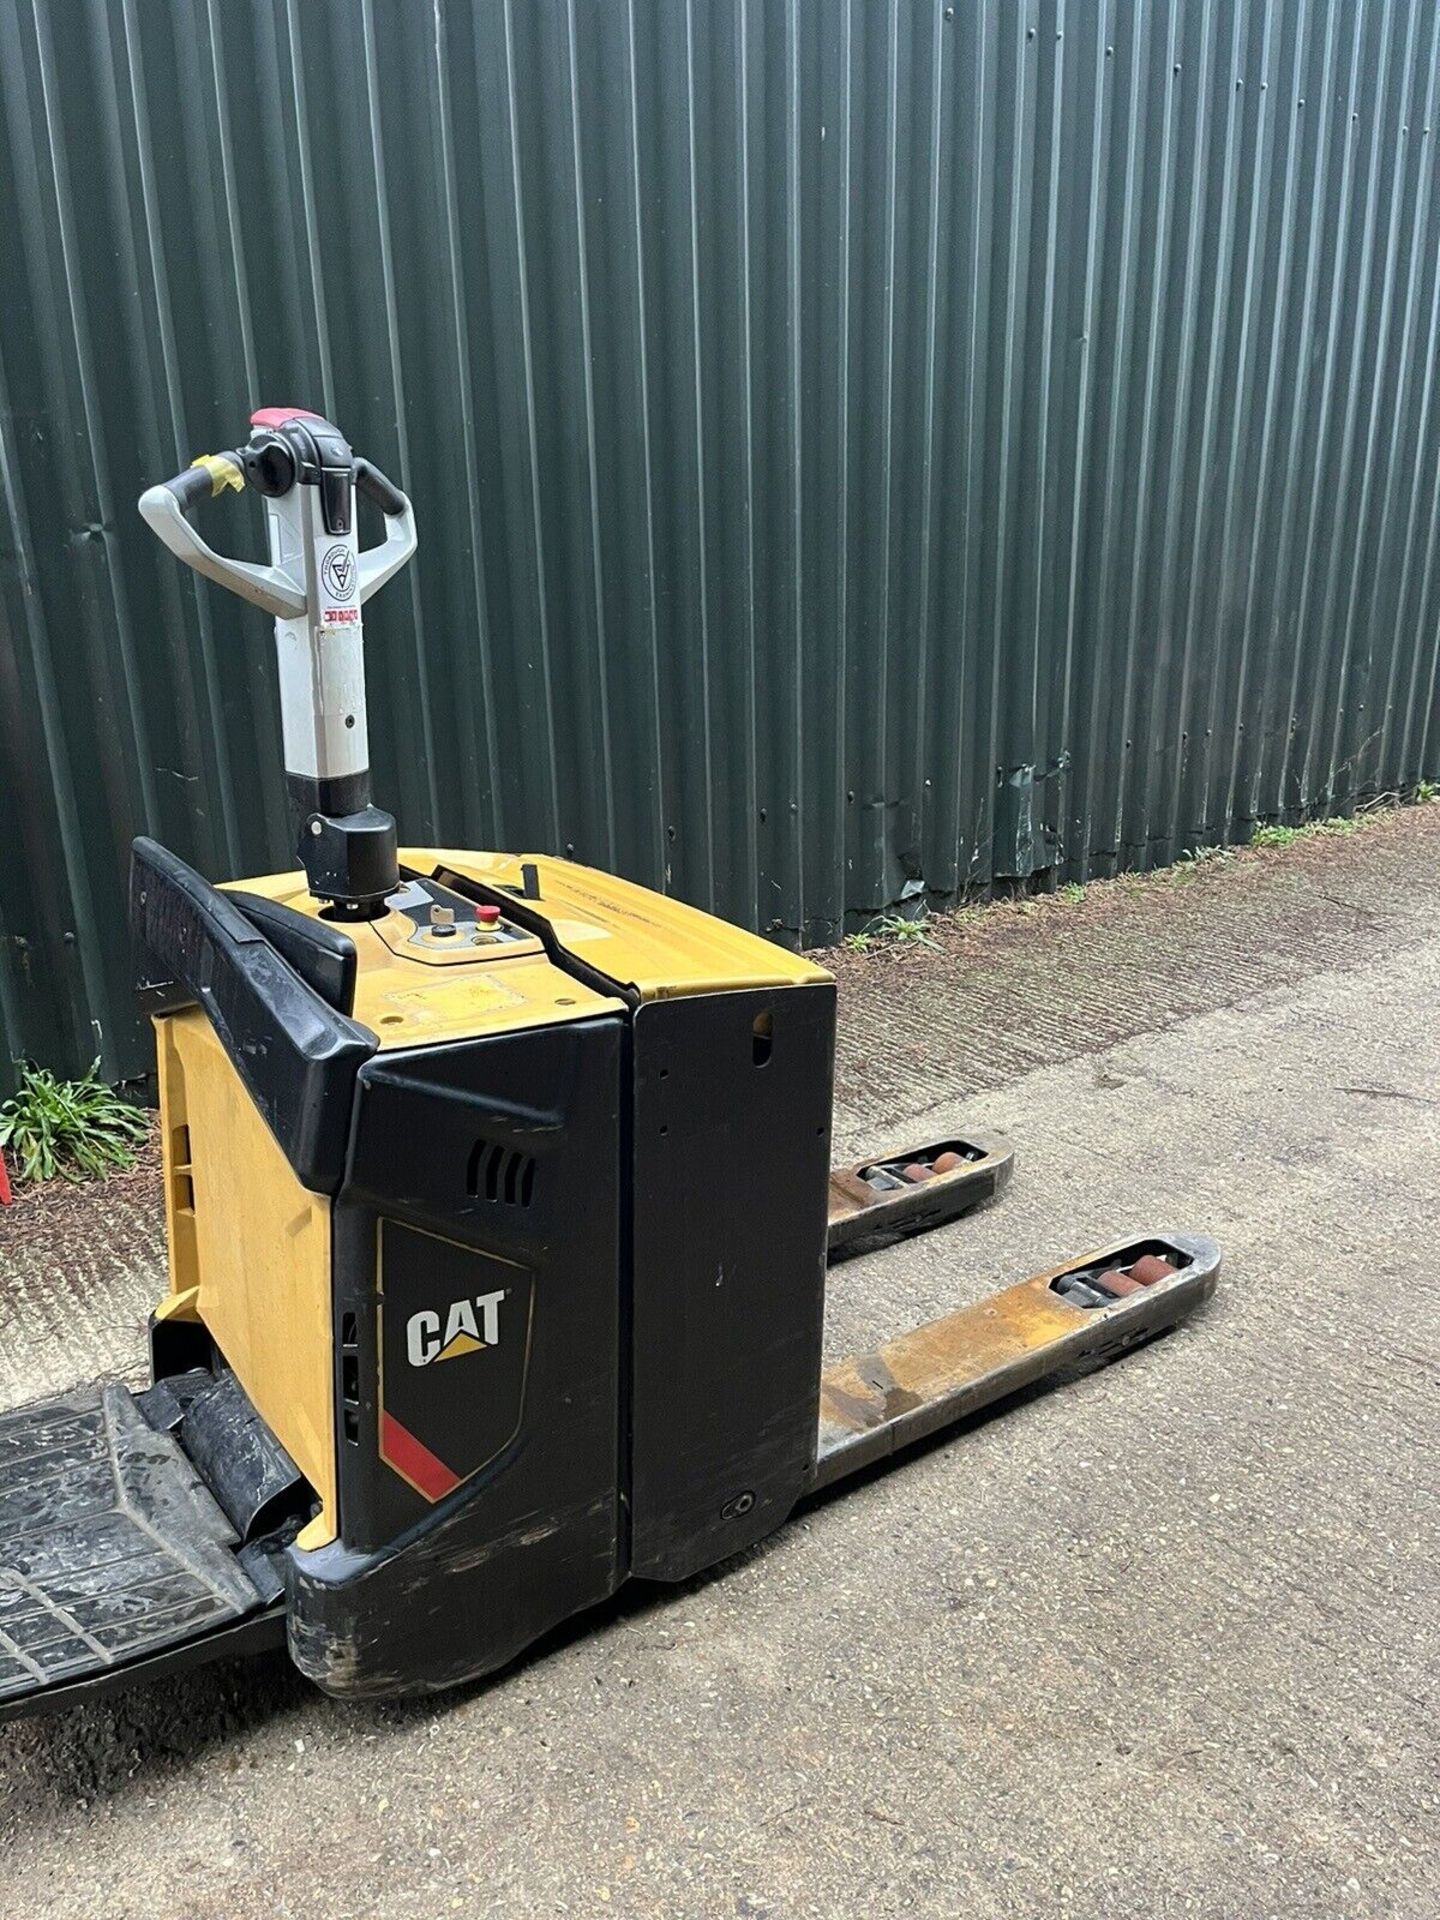 2013, CATERPILLAR 2 Electric Pallet Truck - Image 2 of 5